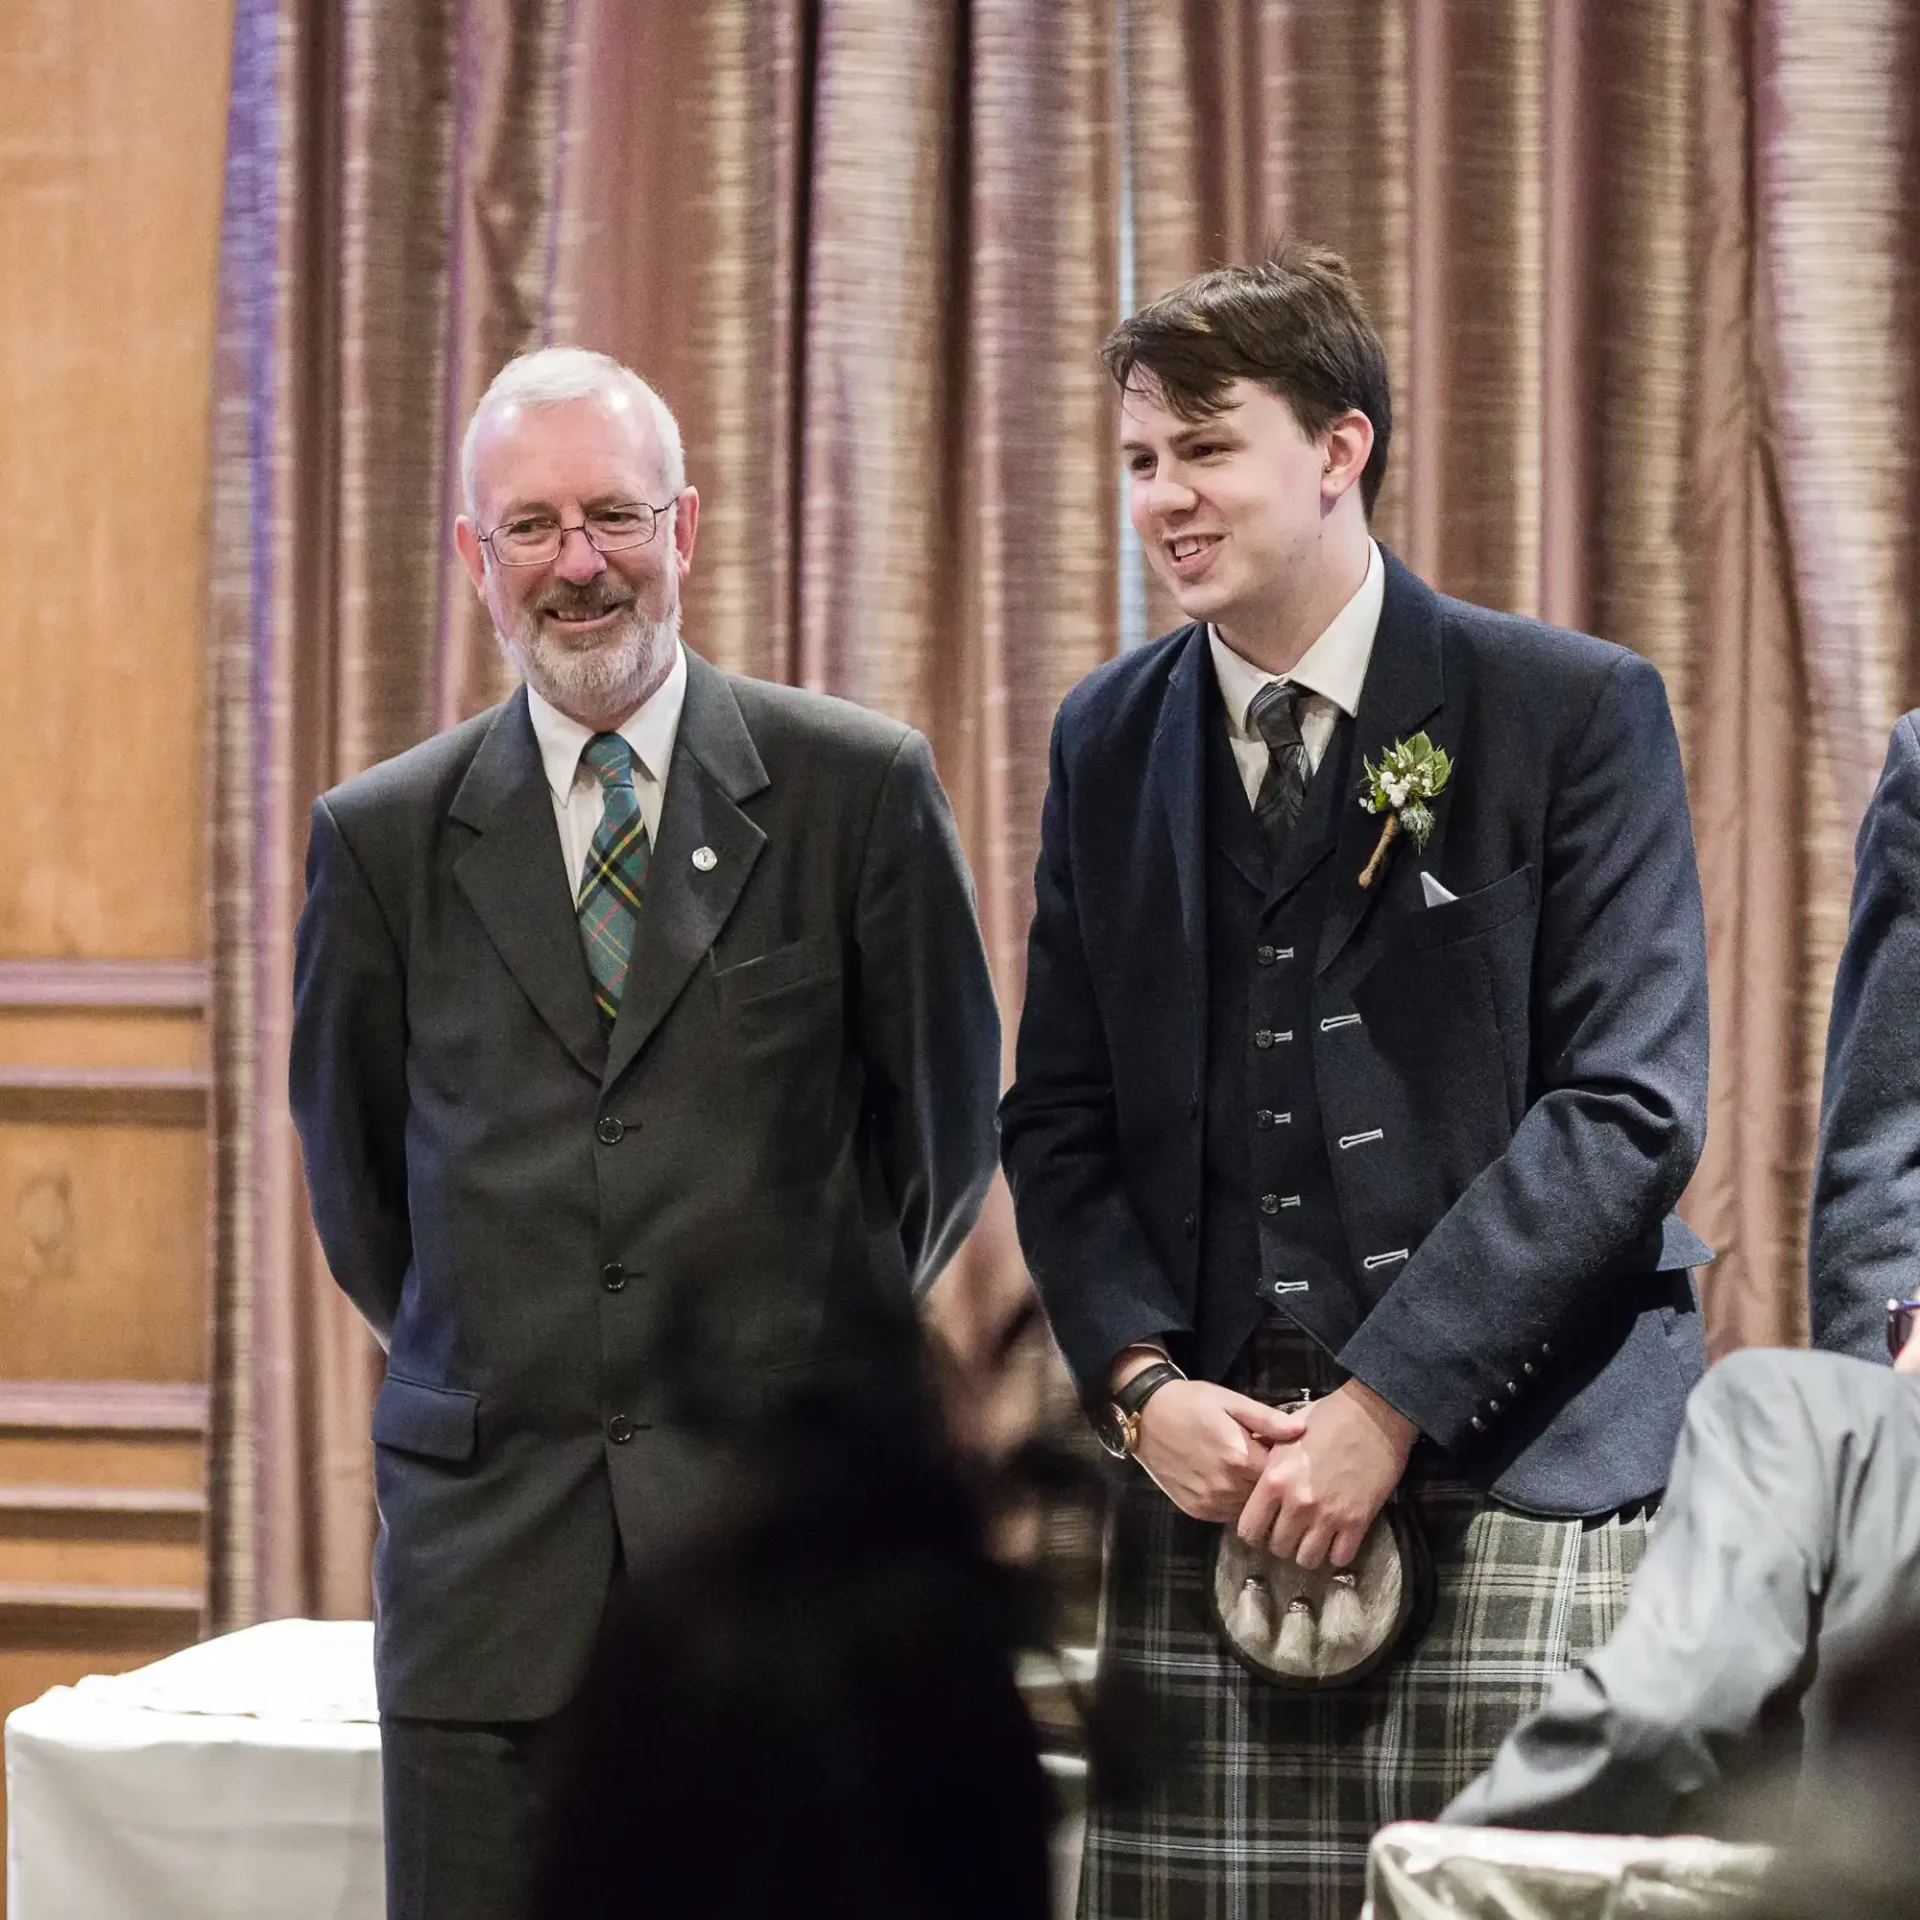 Two men smiling in a ceremonial hall, one wearing a suit and the other in a kilt, standing near a table with blurred guests in the foreground.